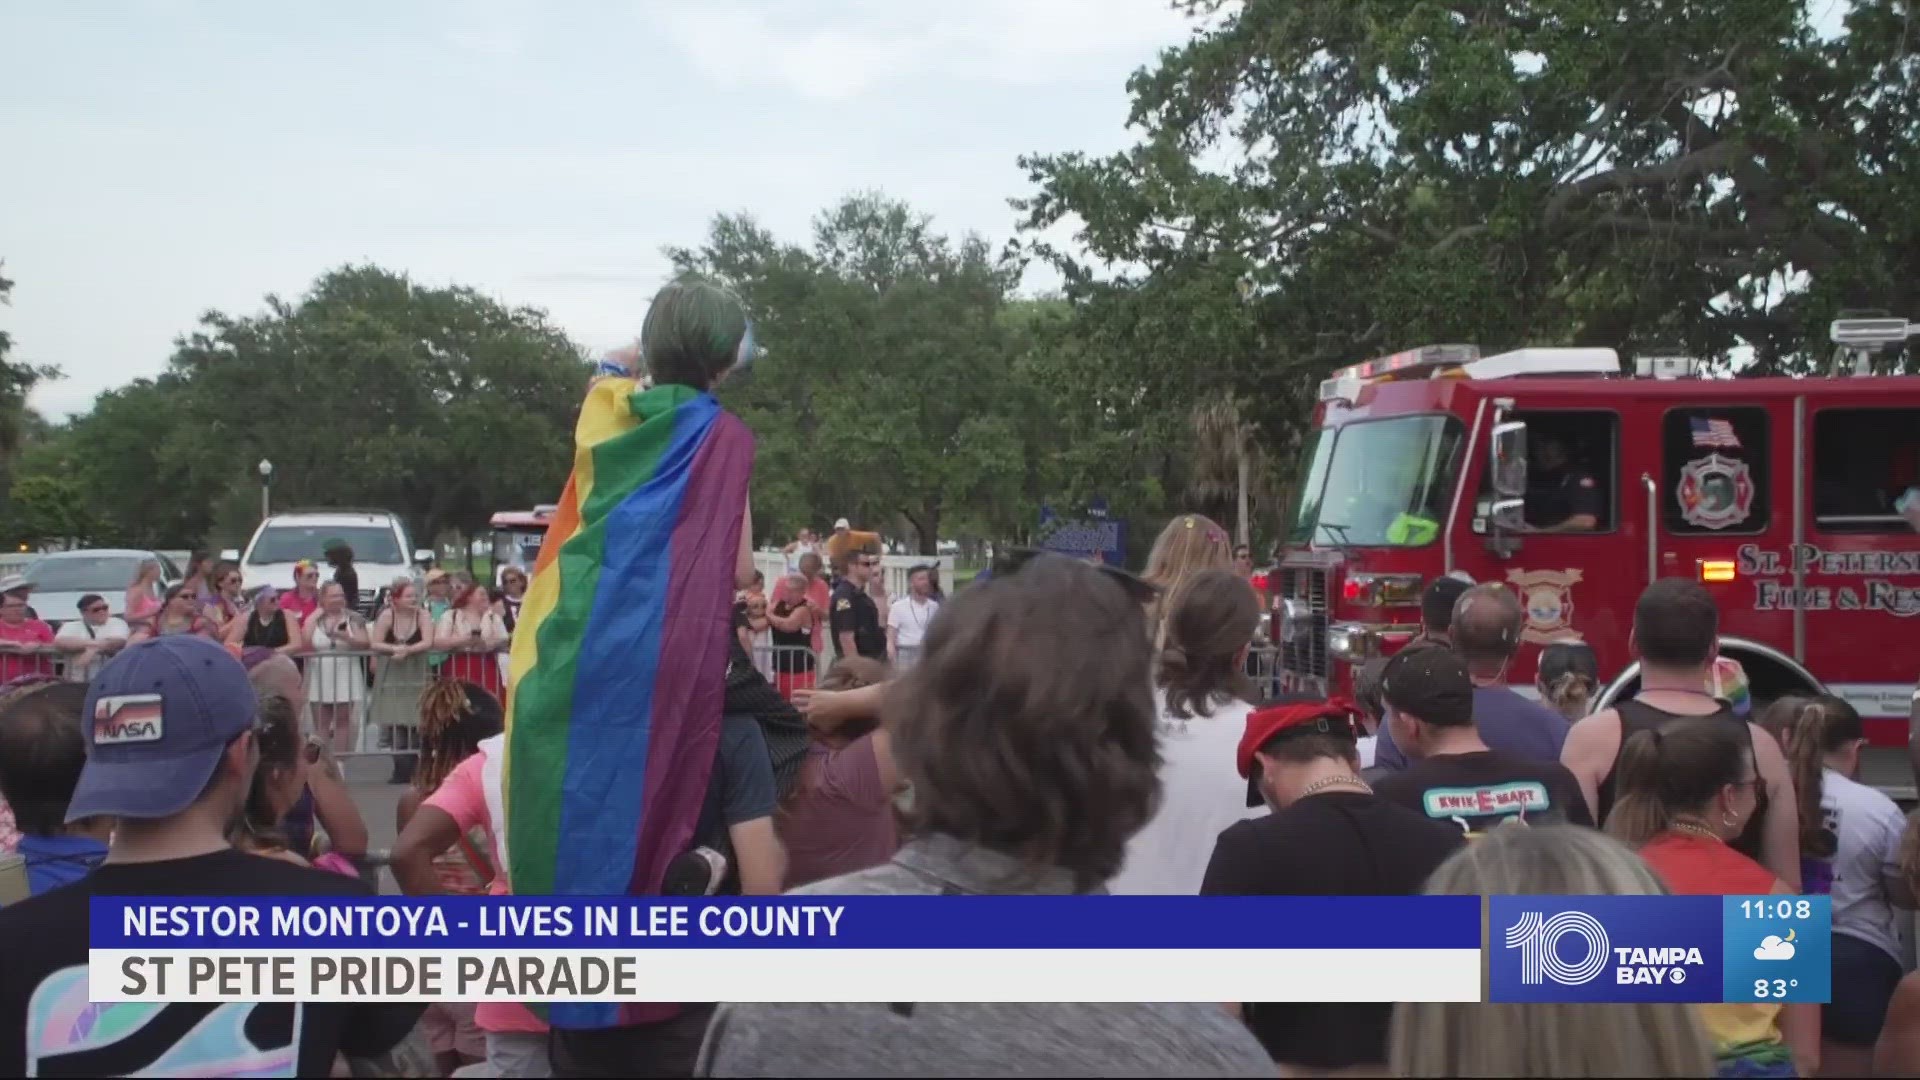 The parade route ran from Albert Whitted Park to Vinoy Park along Bayshore Drive as thousands of people filled up the sides of the parade route.